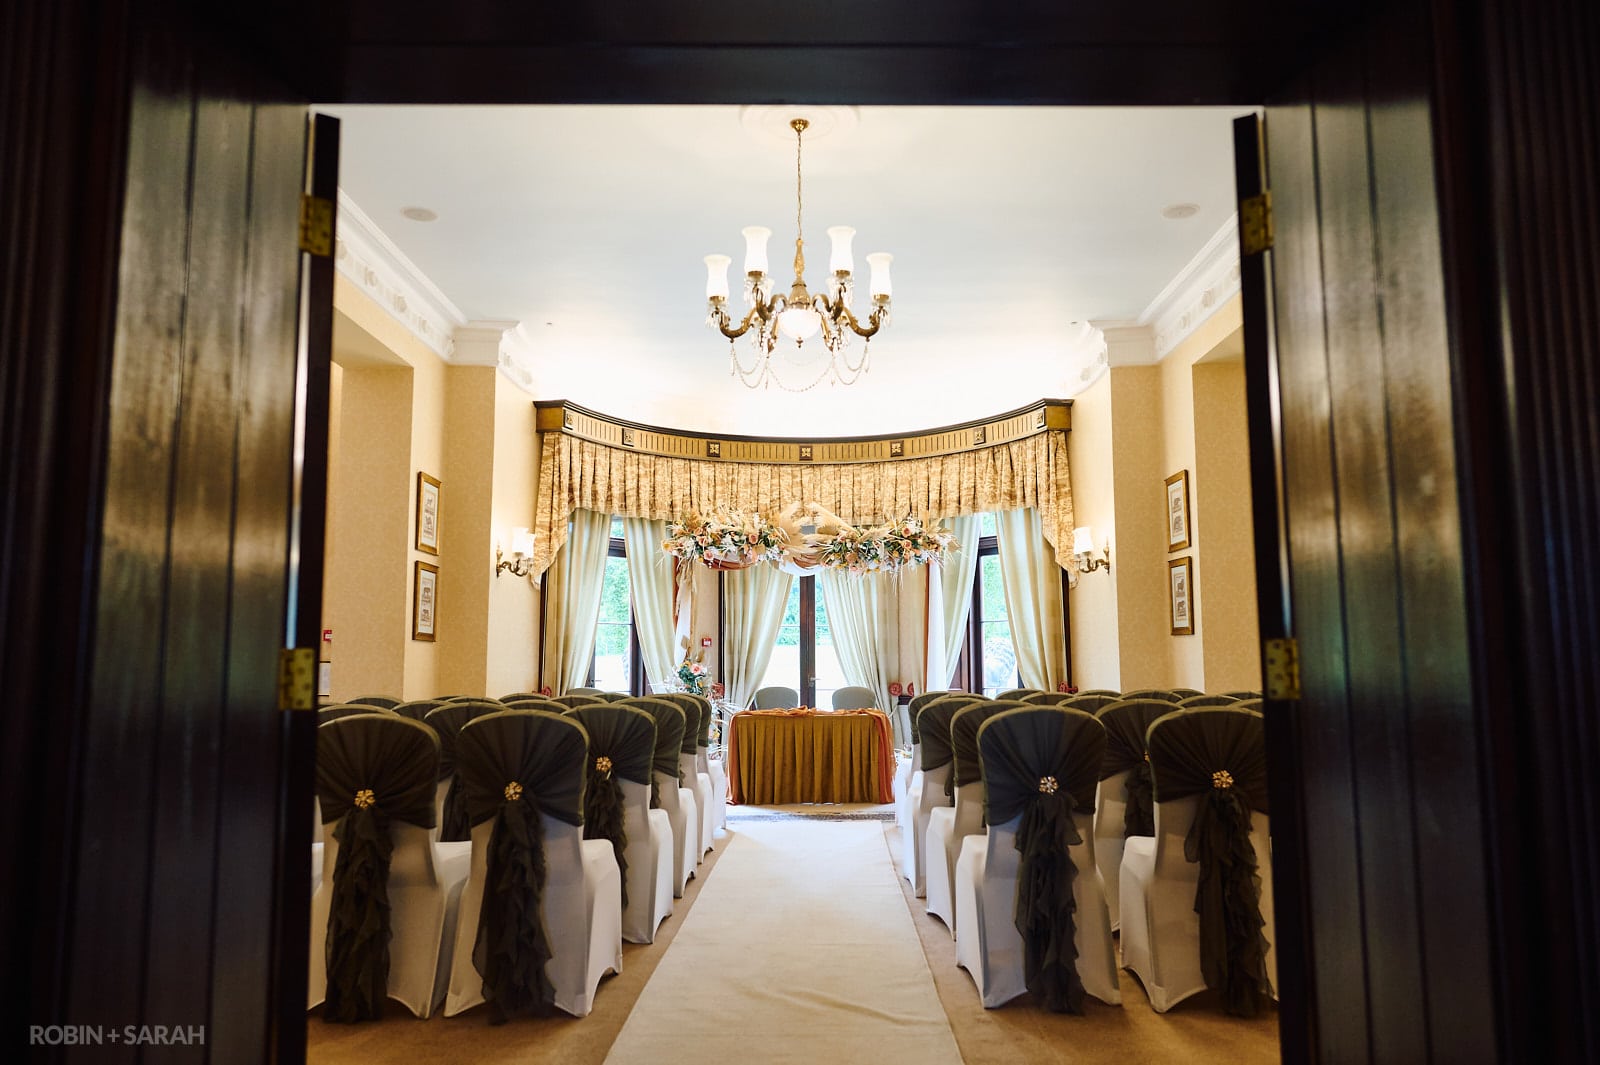 Ceremony room at Spring Grove House set up for wedding